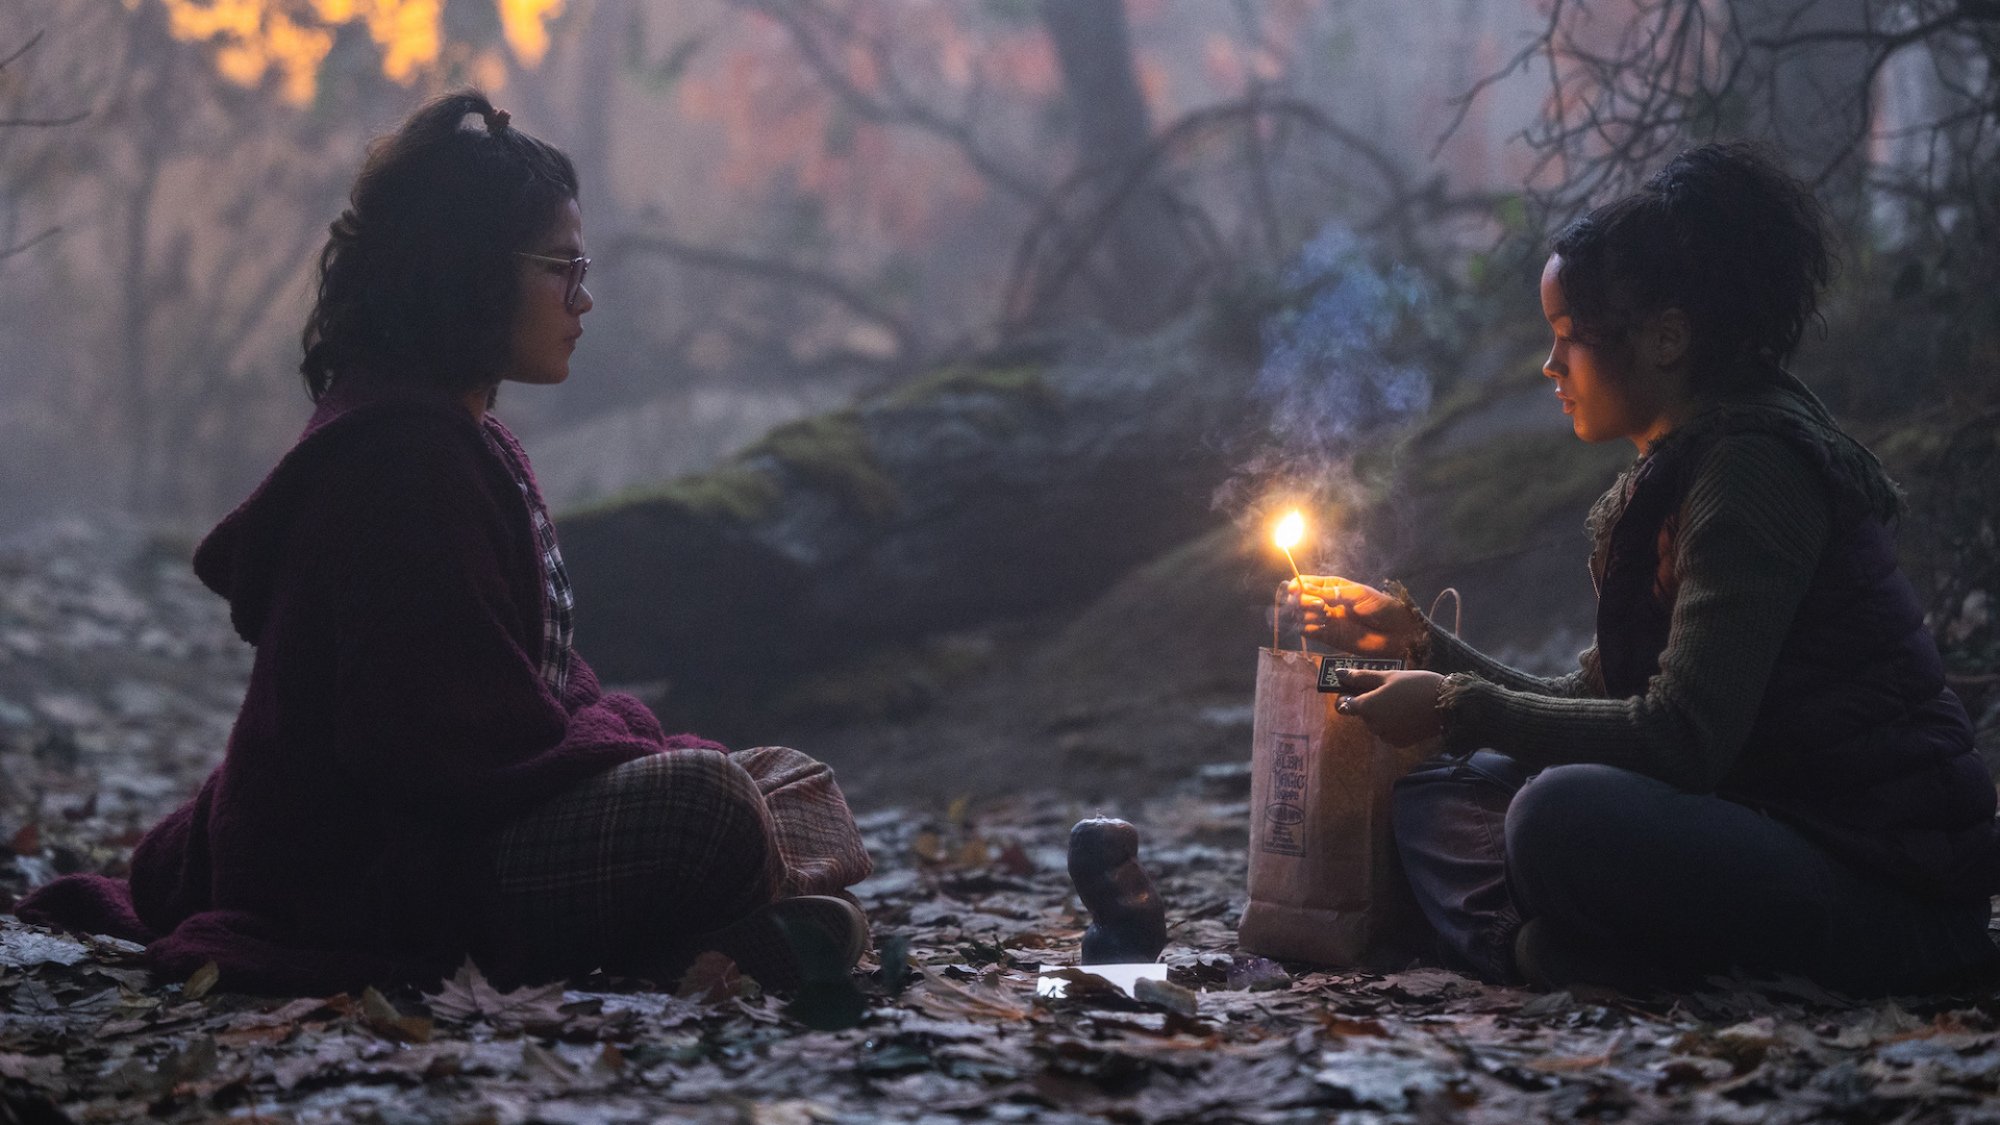 Two girls sit in a wood with a candle, facing each other.